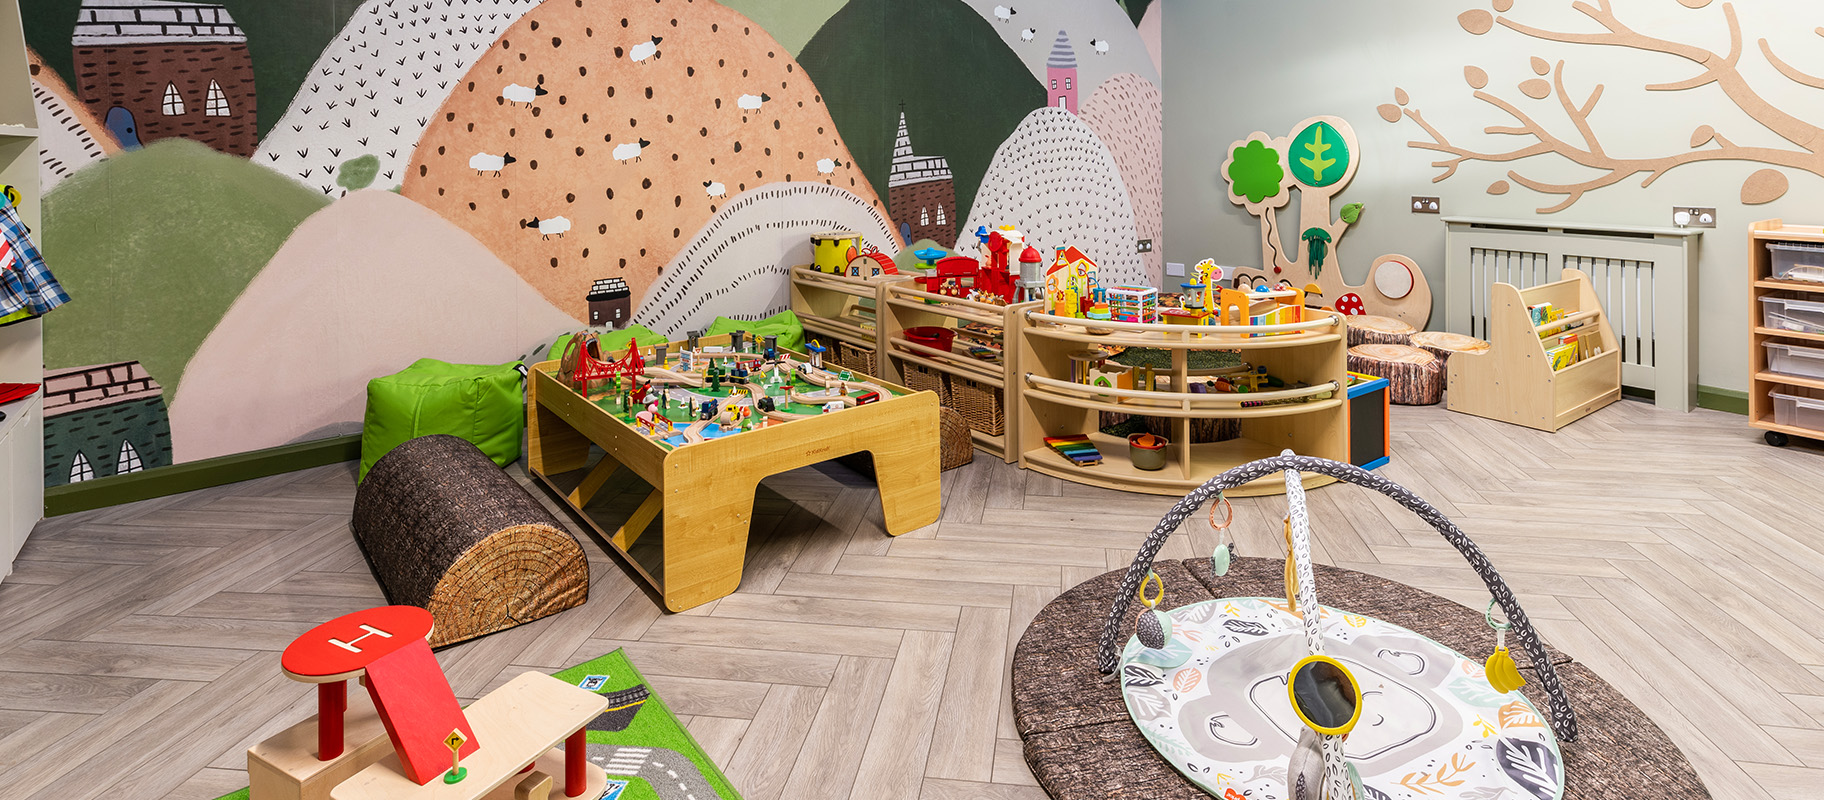 Children's playroom with toys 